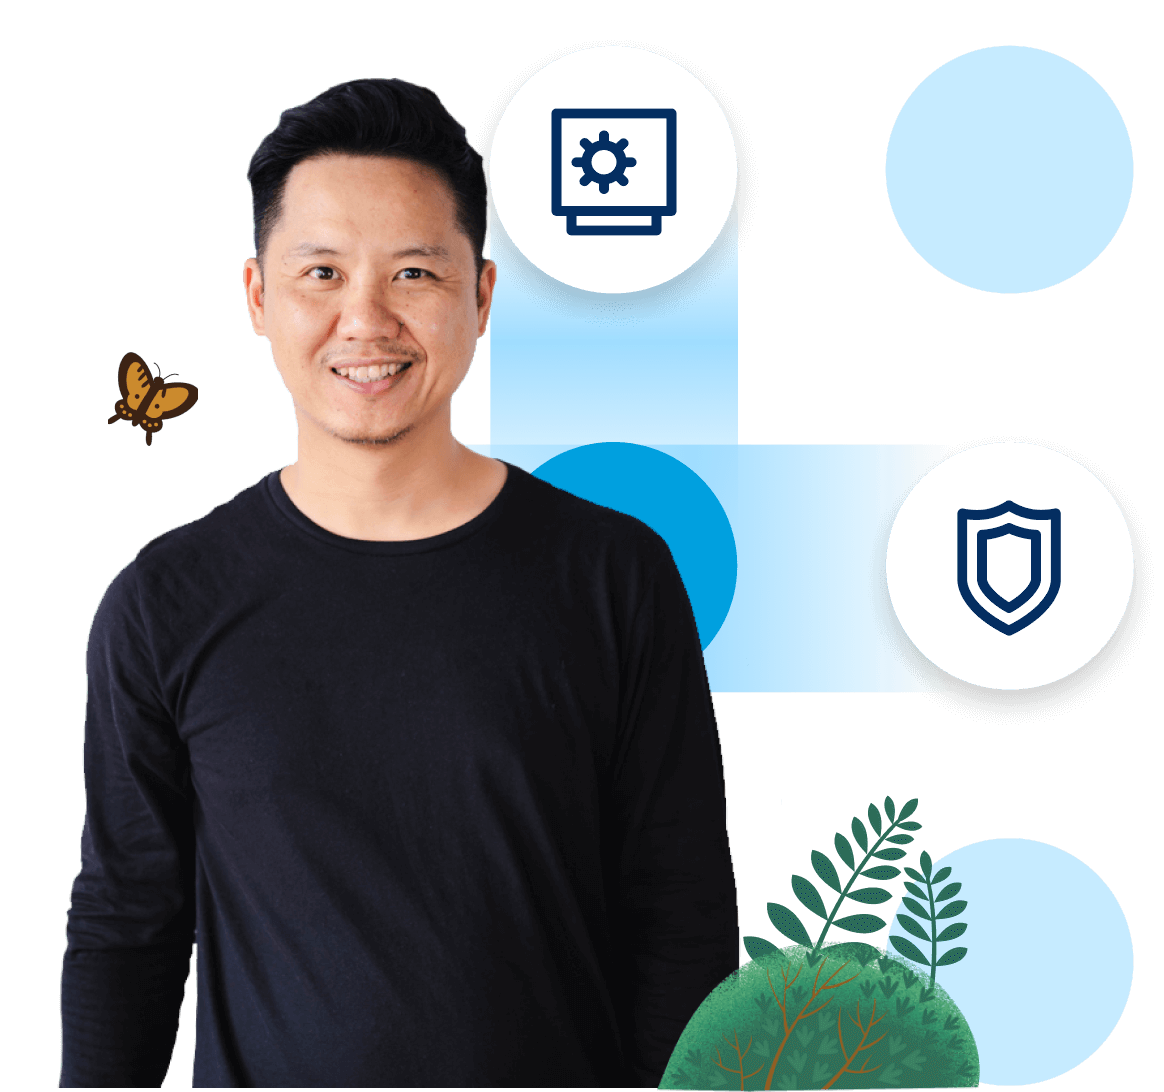 MuleSoft policyholder experience